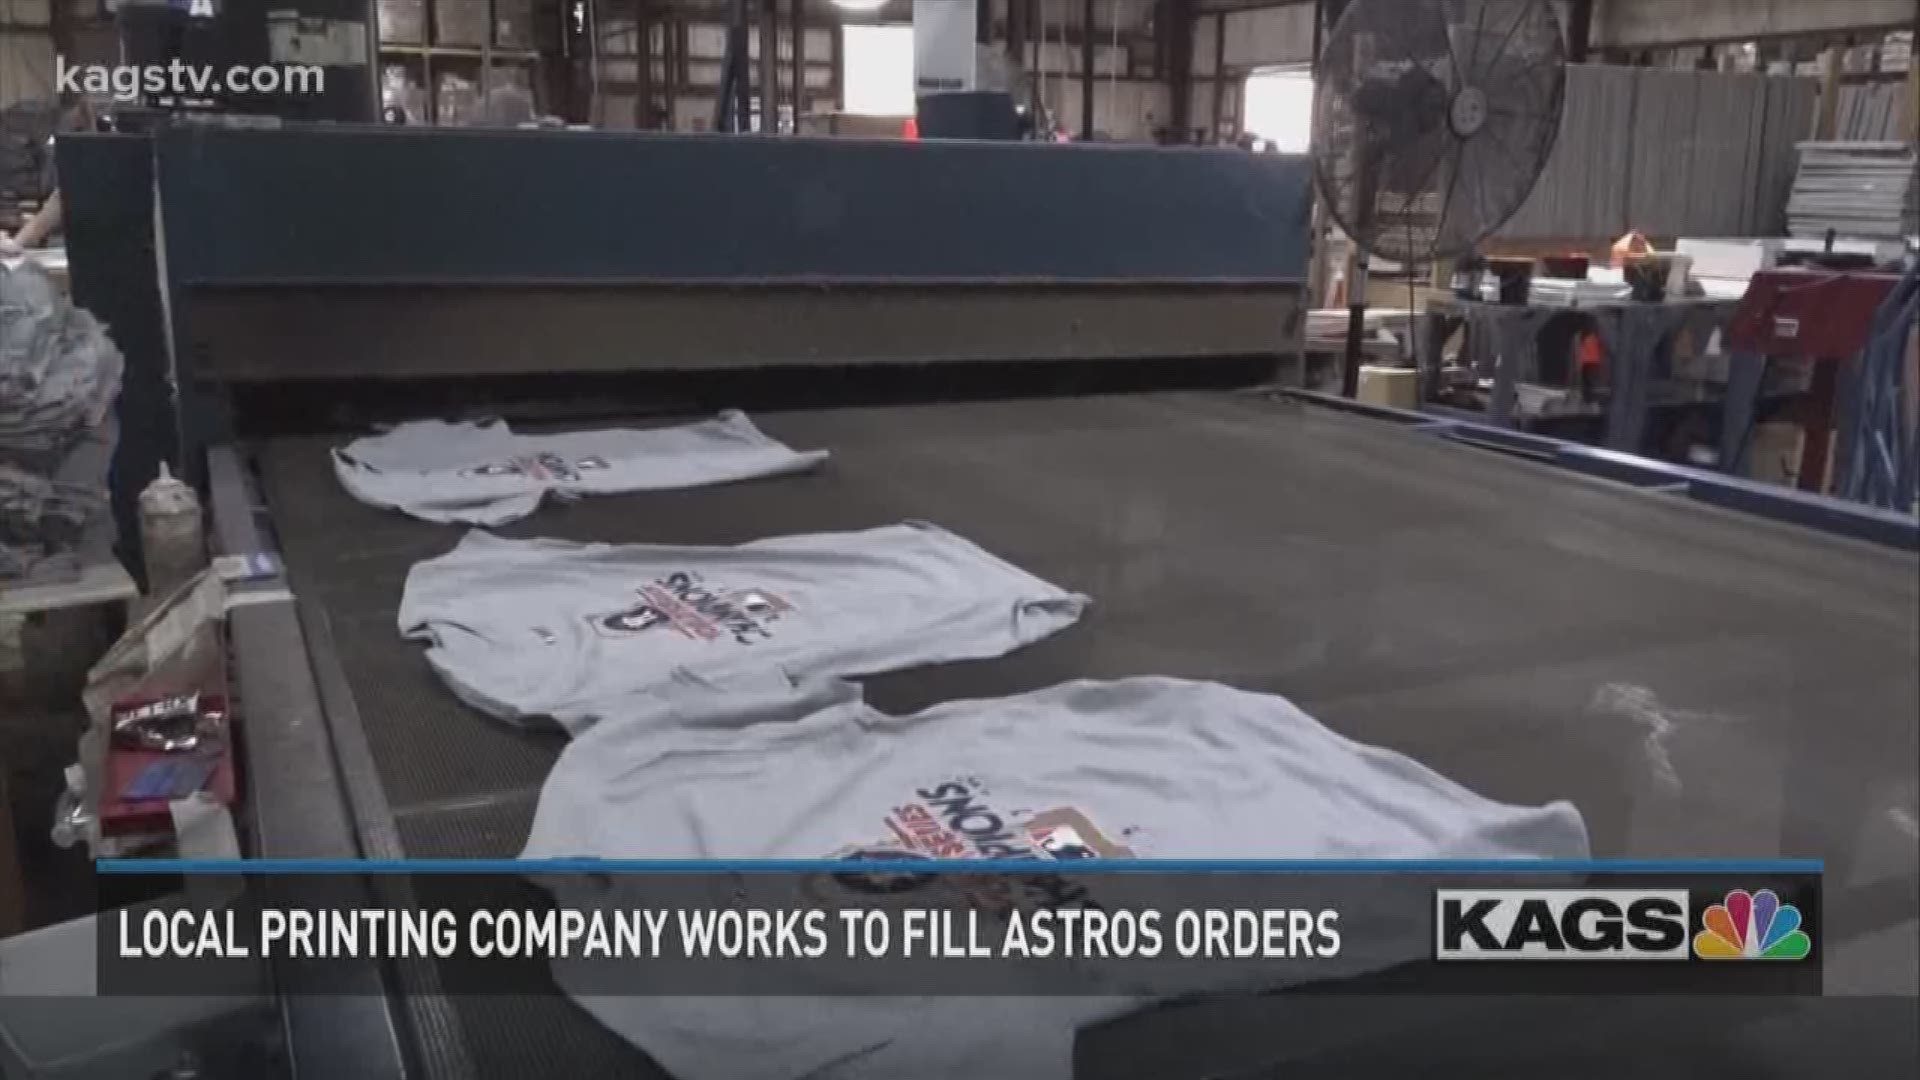 C.C. Creations works through the night to make Astros Championship